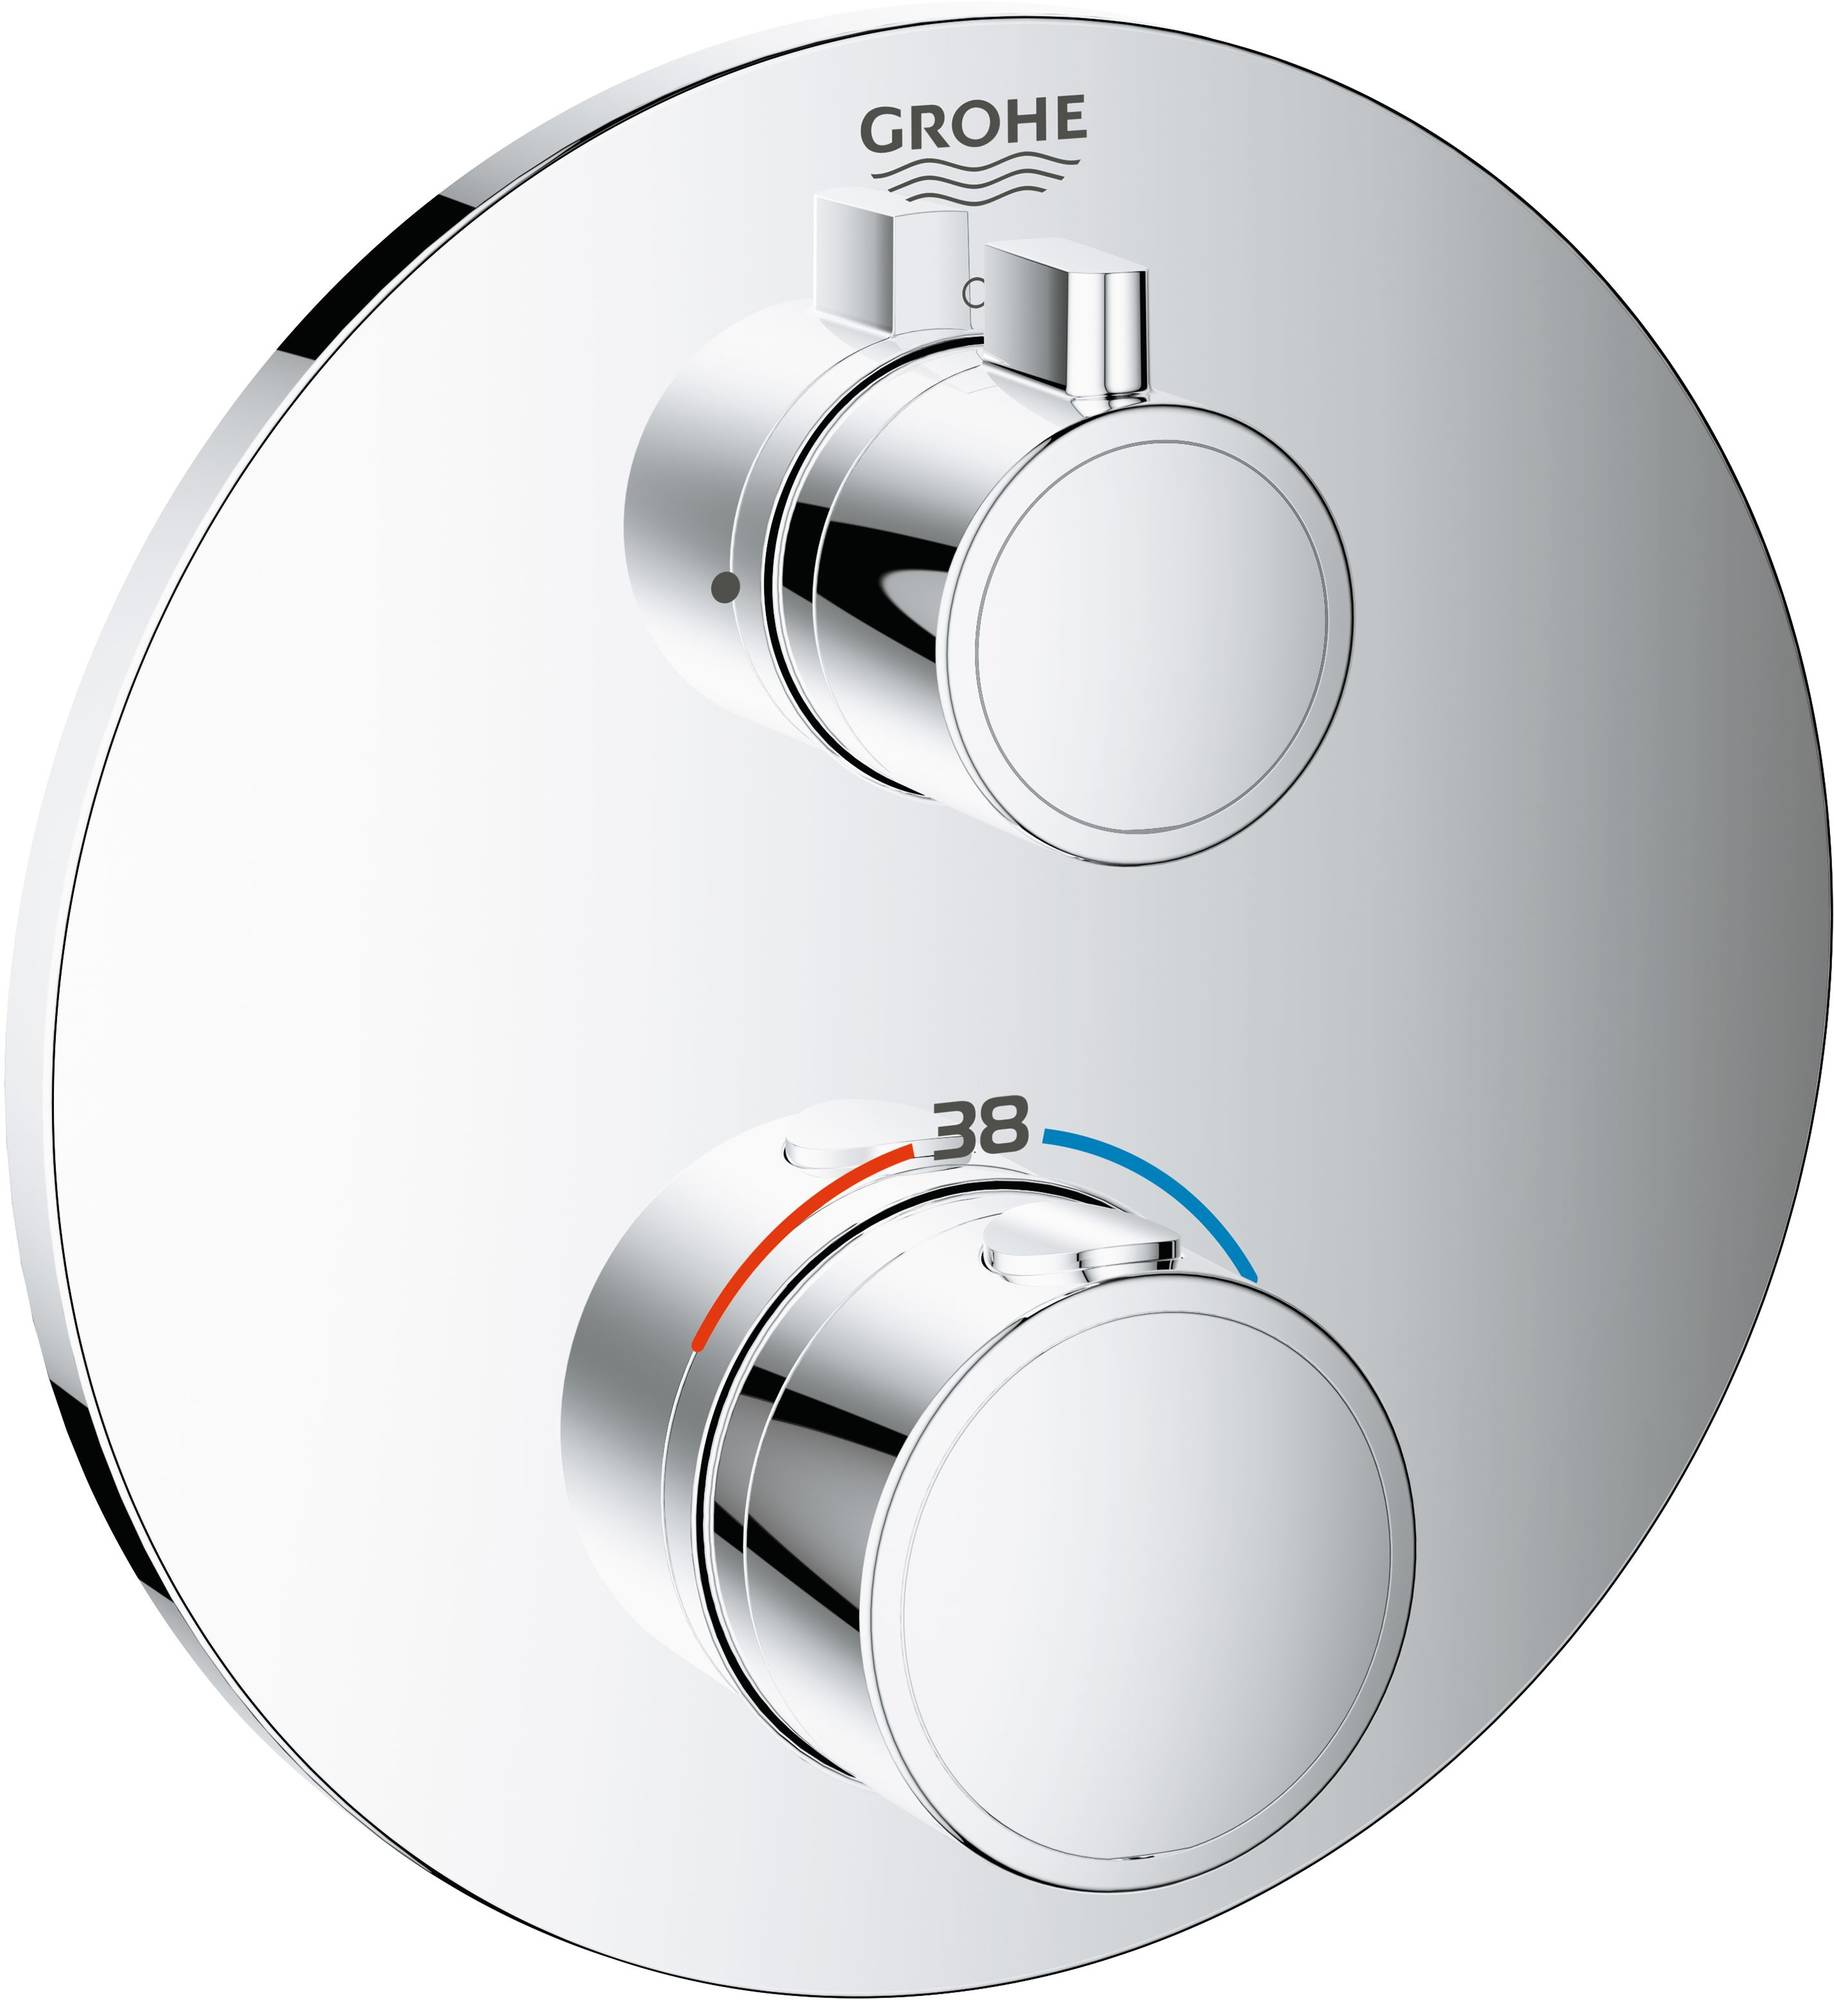 Grohe Grohtherm Afbouwdeel Thermostaat Ø15,8x4,3 cm Chroom